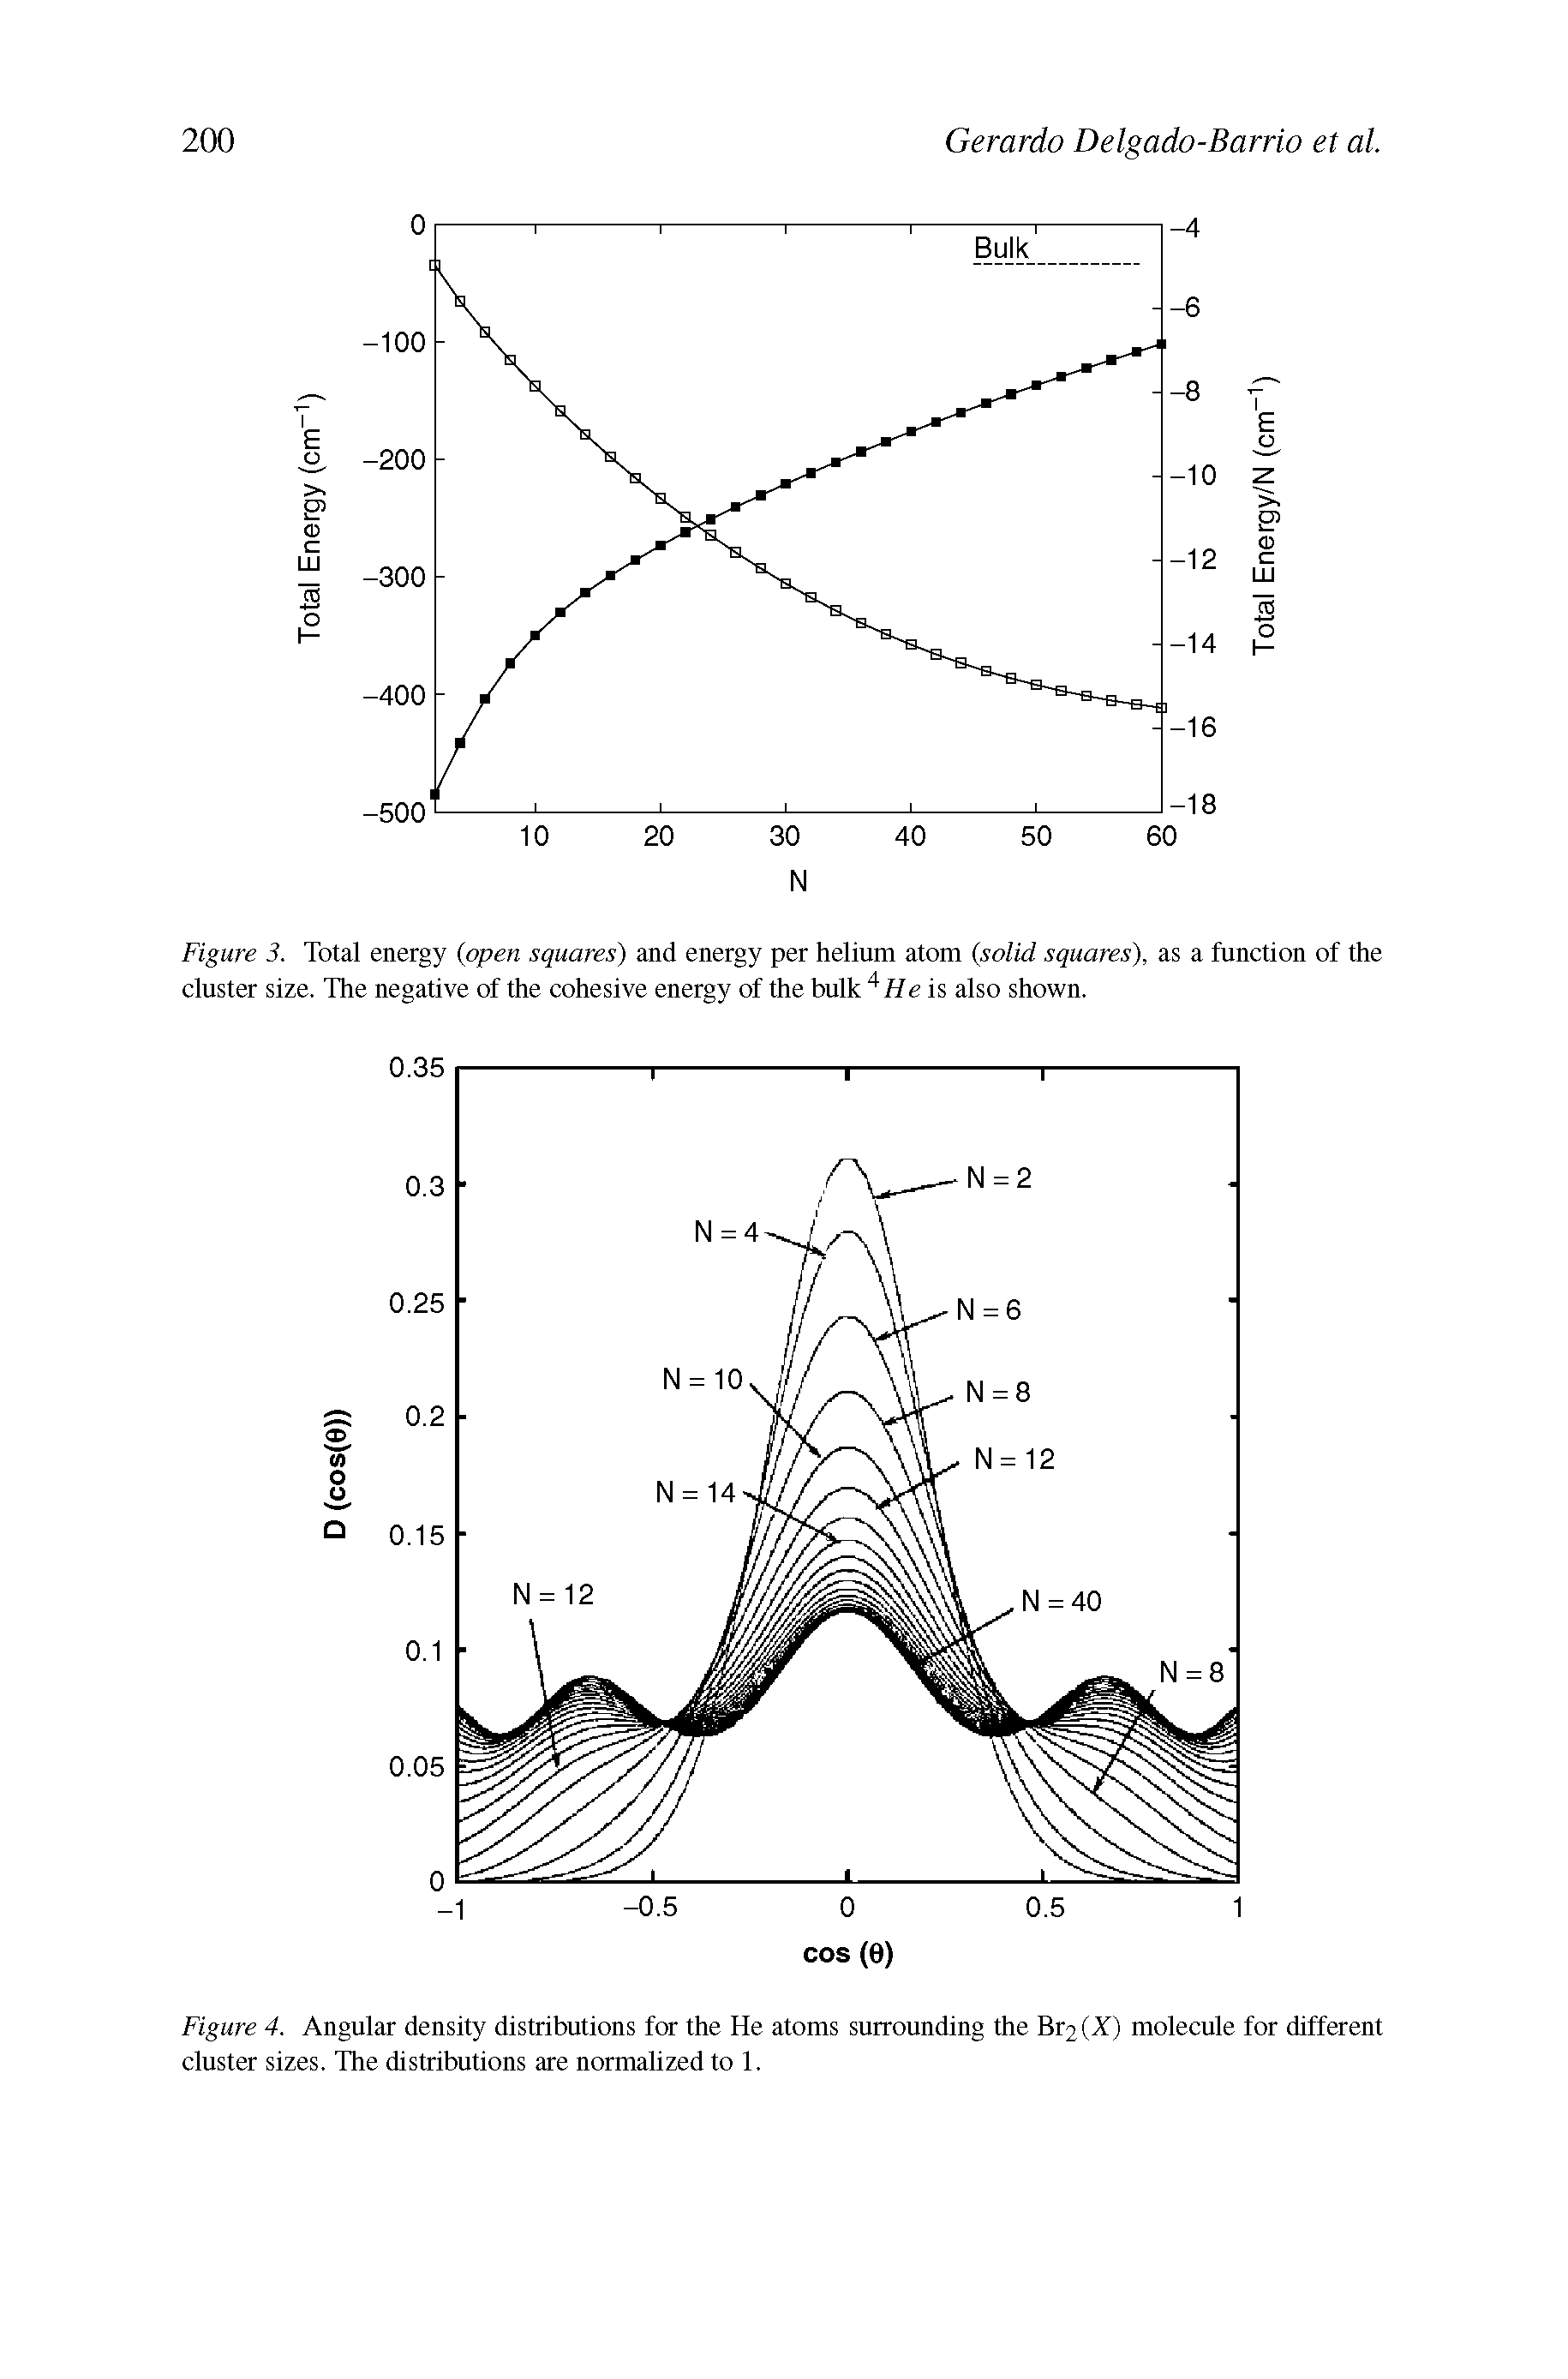 Figure 4. Angular density distributions for the He atoms surrounding the Br2 (X) molecule for different cluster sizes. The distributions are normalized to 1.